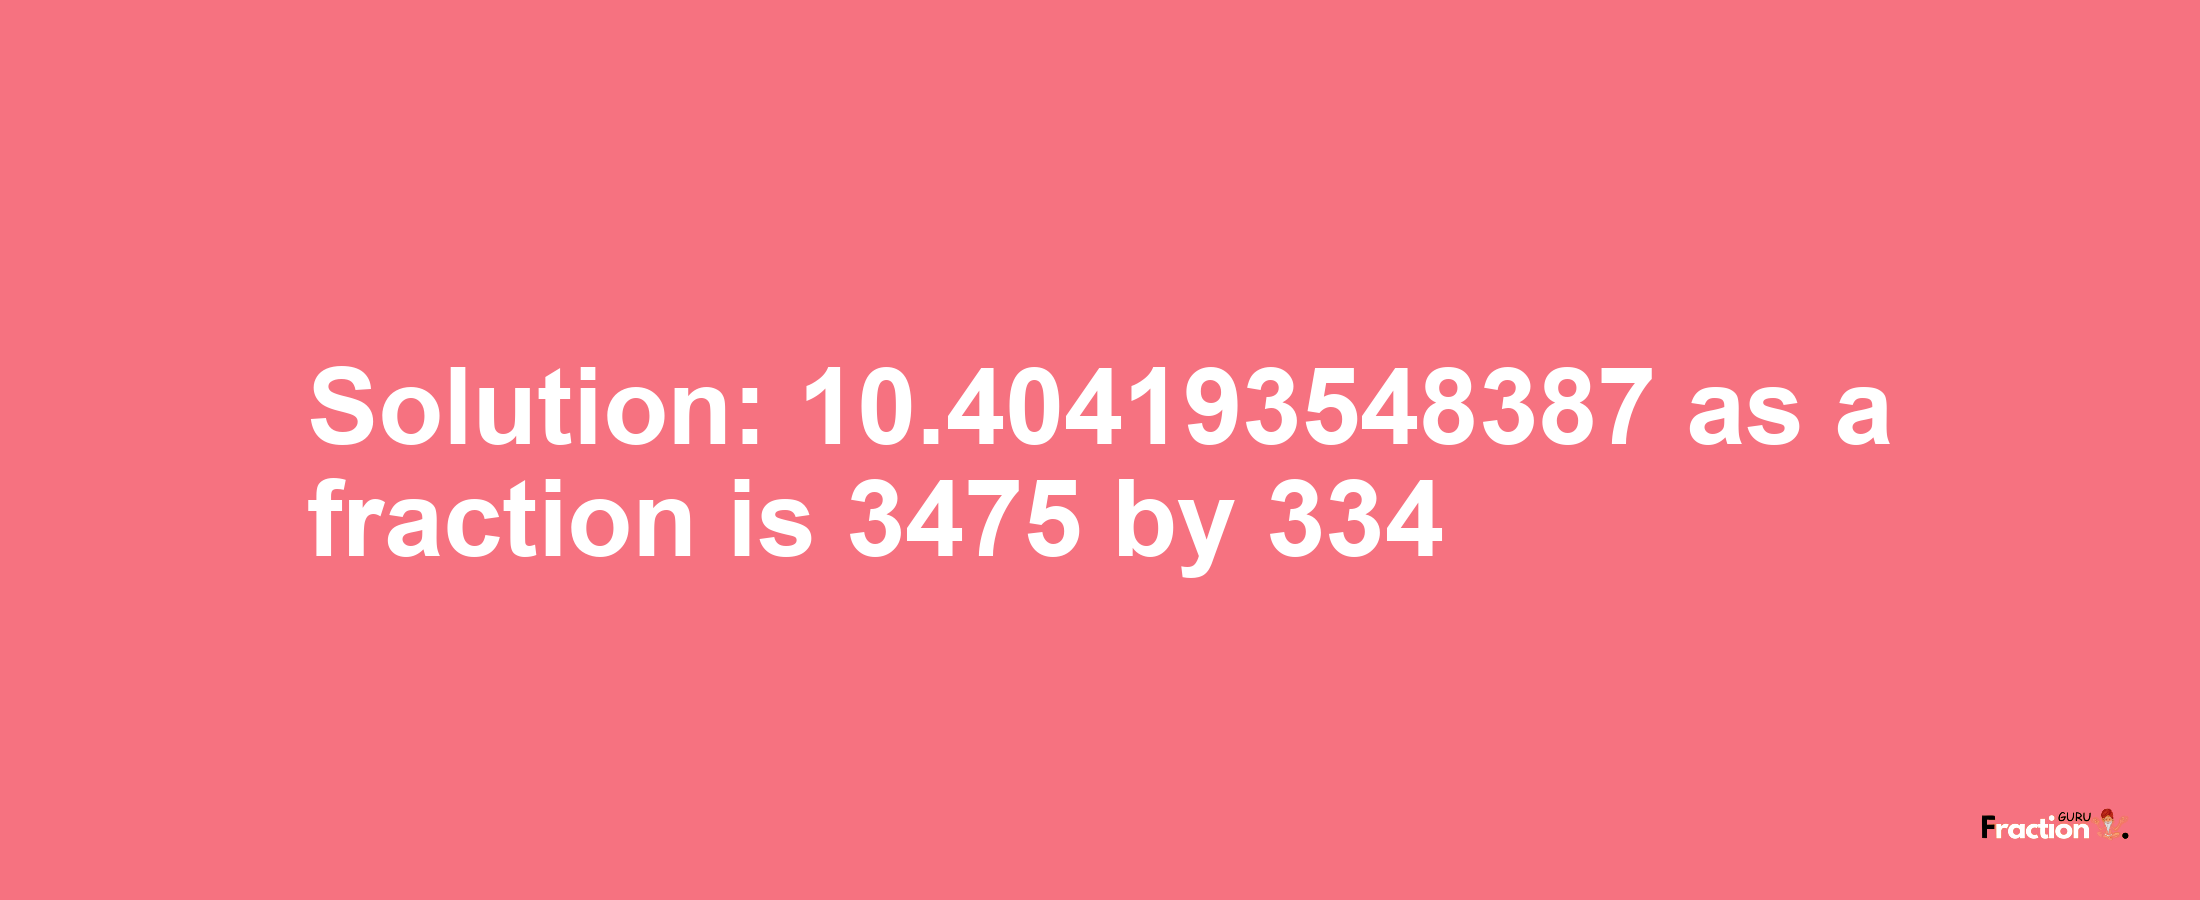 Solution:10.404193548387 as a fraction is 3475/334